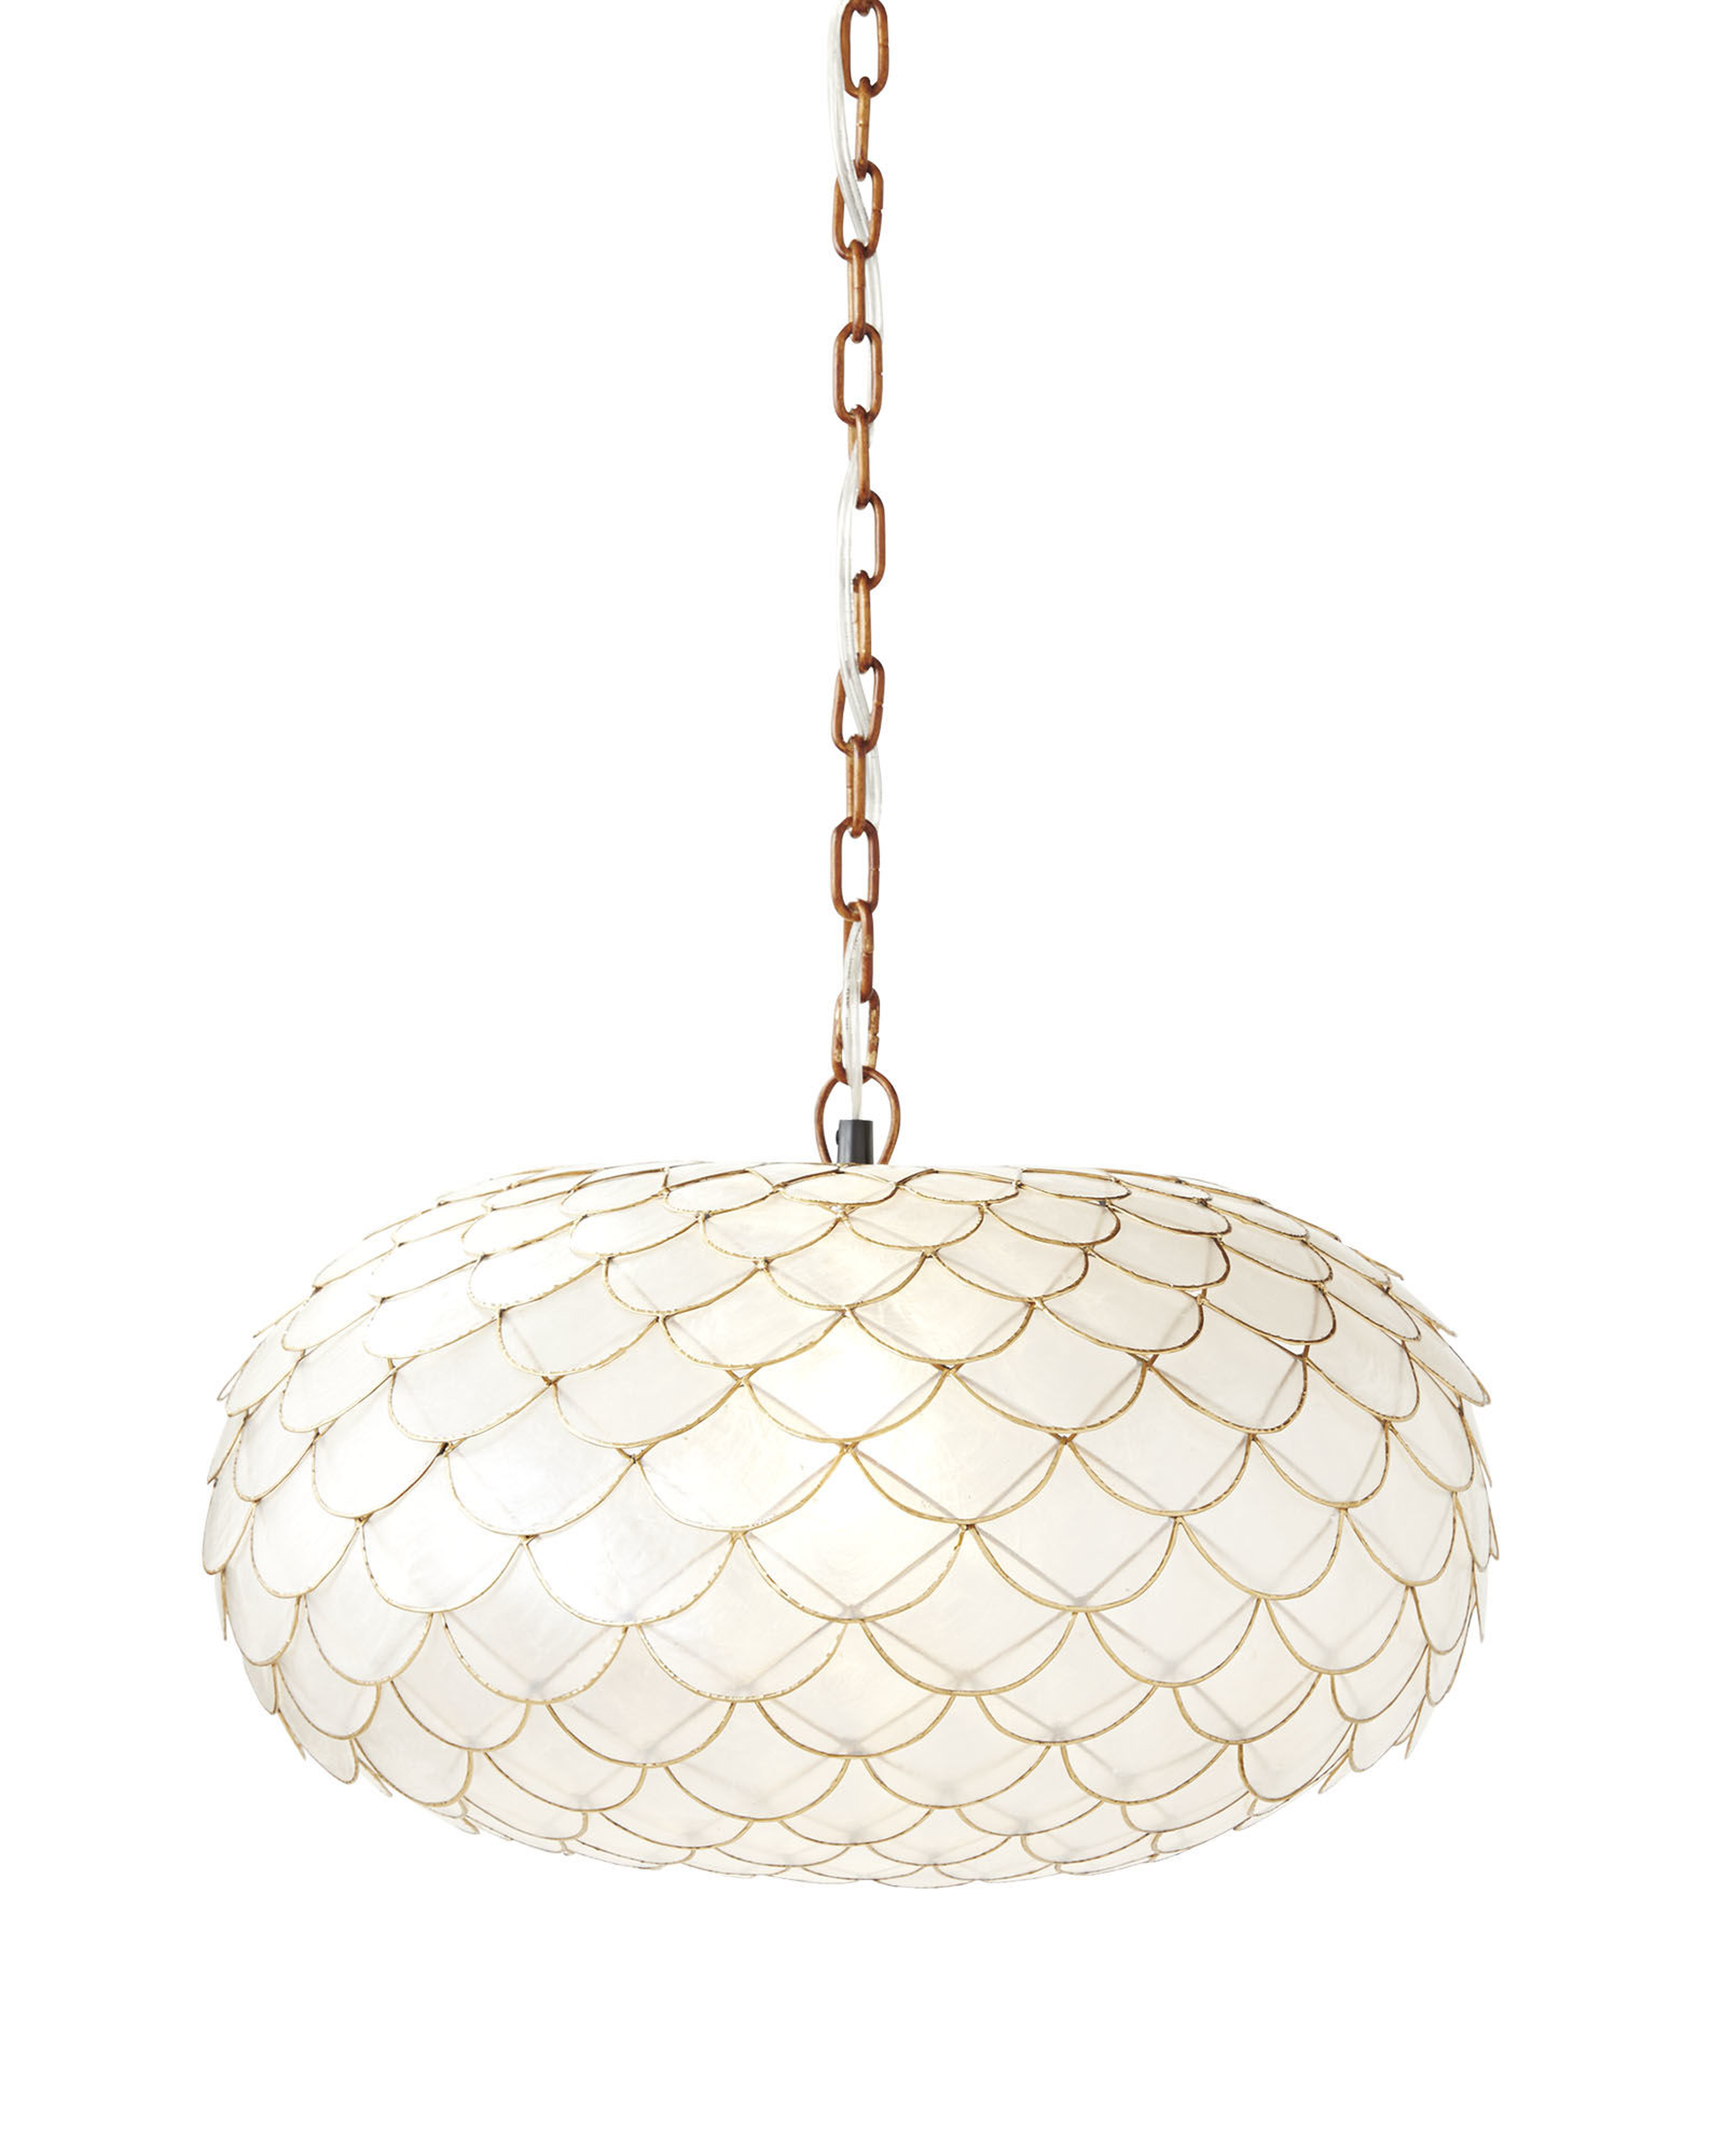 Capiz Scalloped Chandelier - Serena and Lily